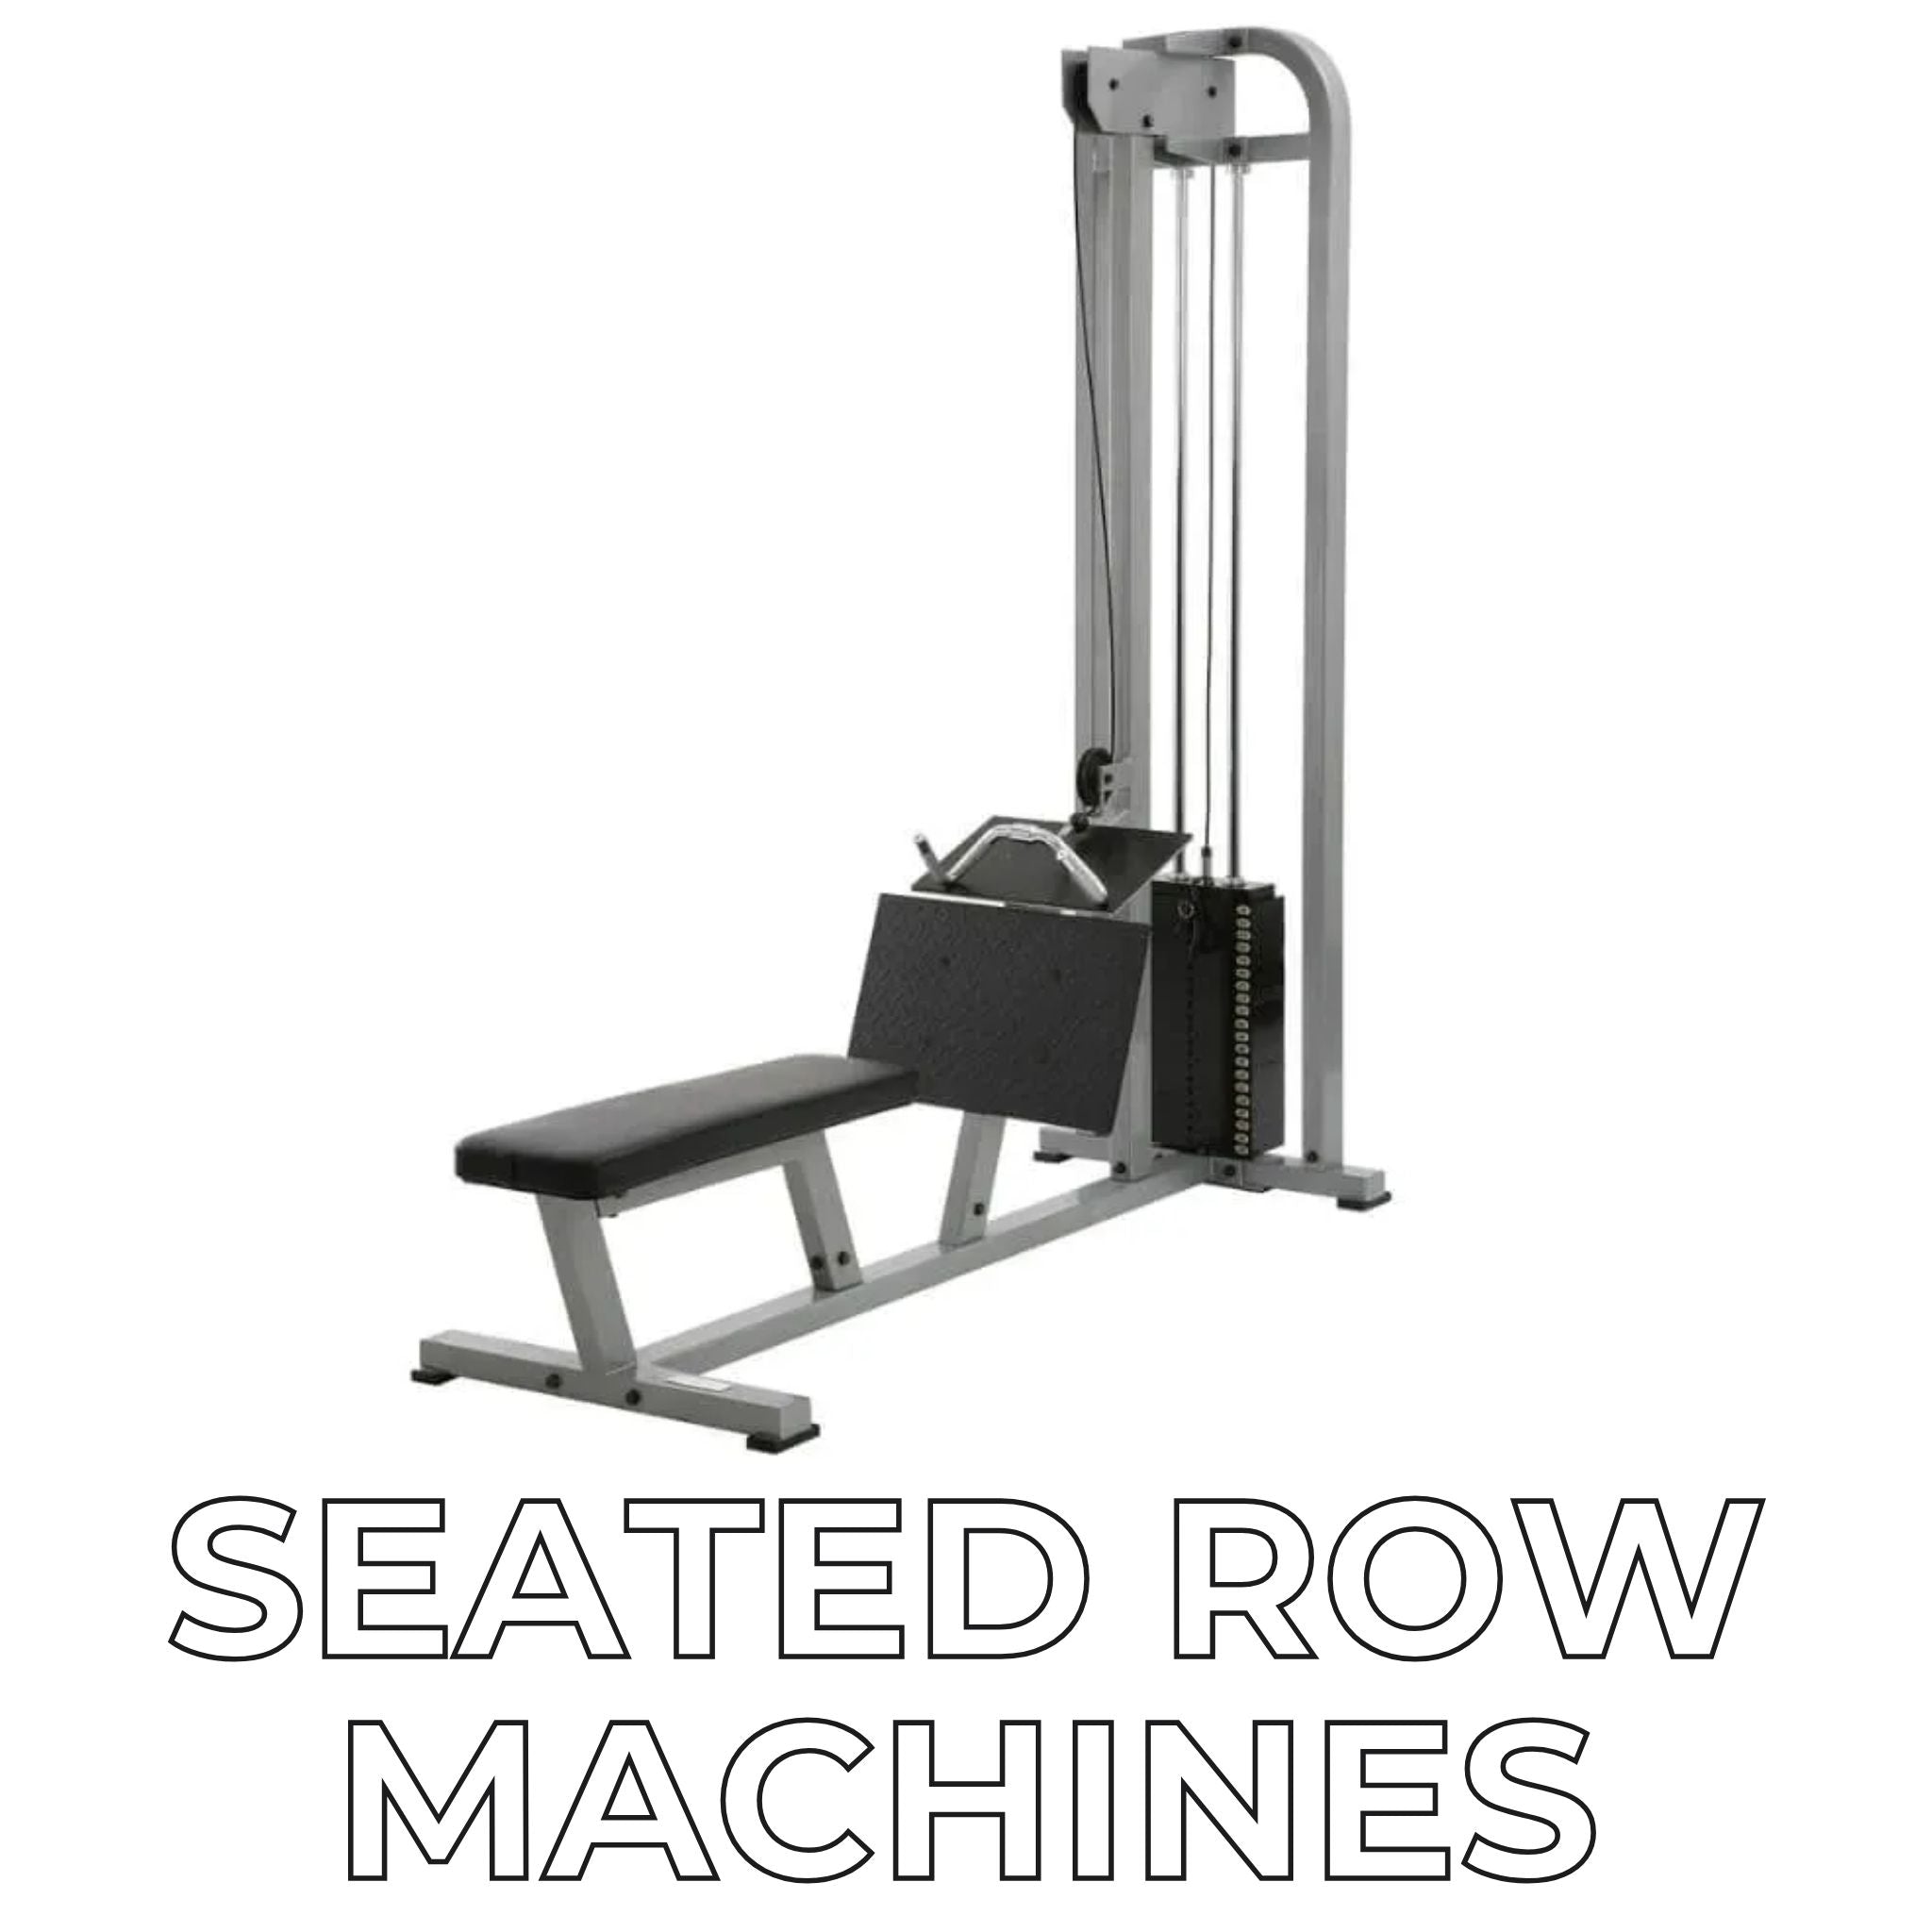 Seated row machine white background with text.